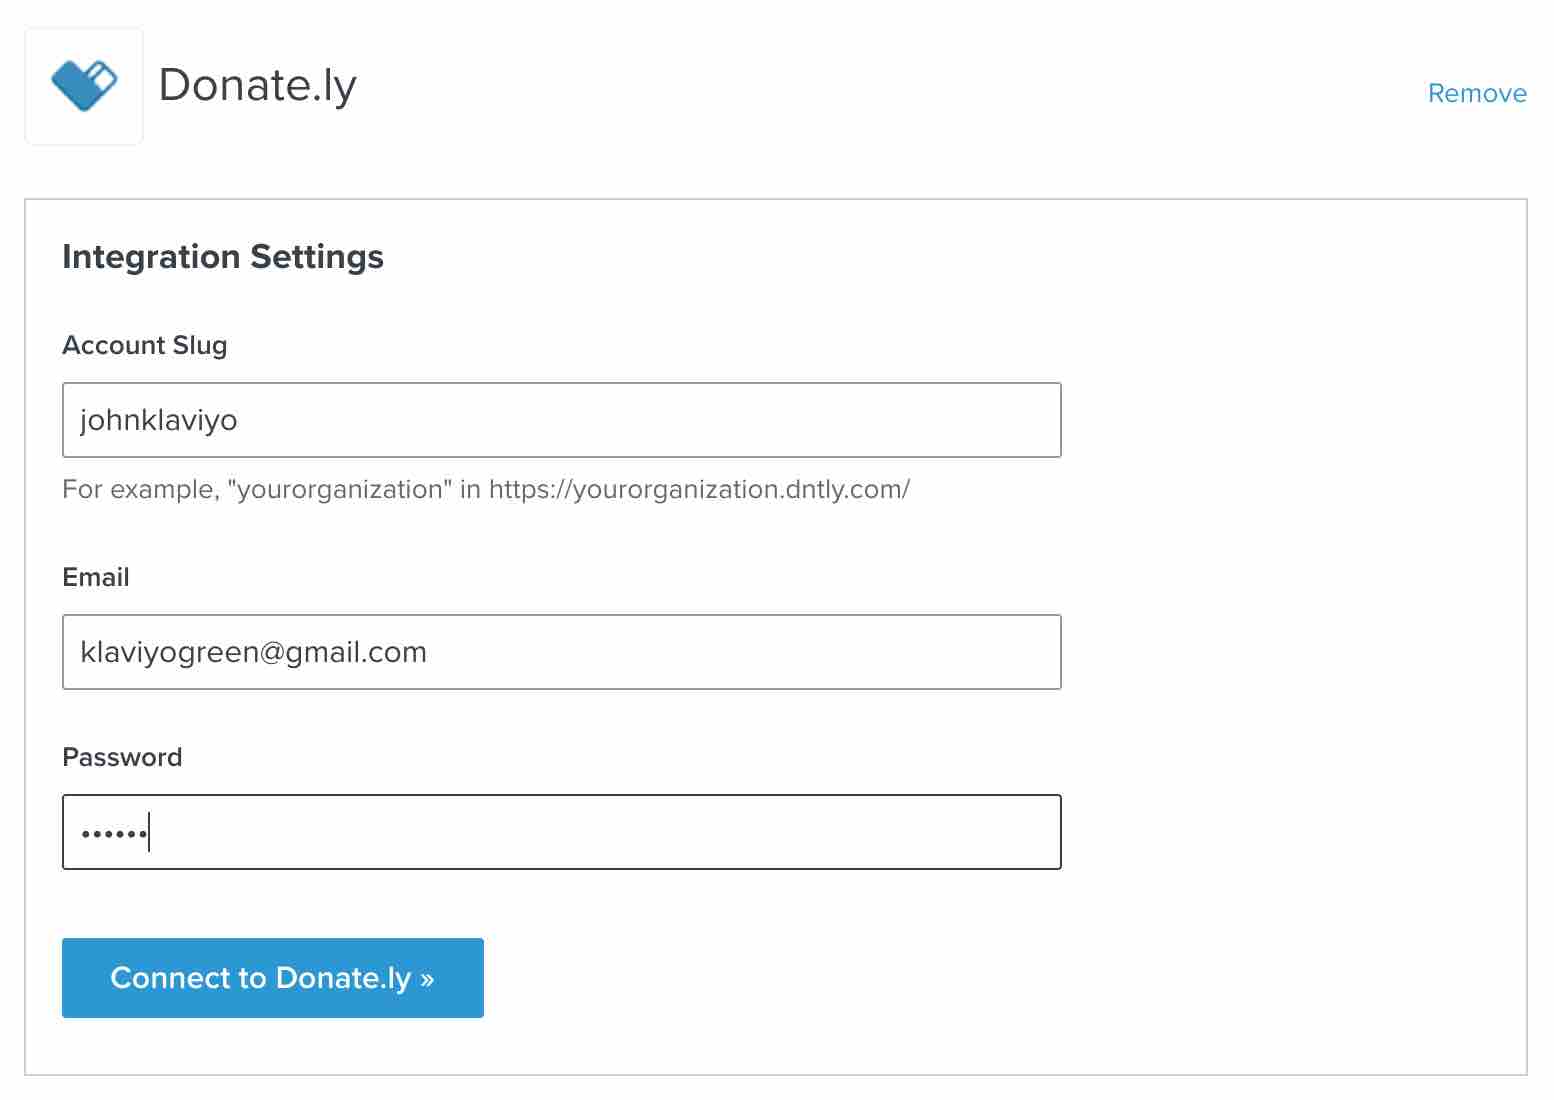 Donate.ly integration settings page in Klaviyo with fields for Account Slug, Email, and Password